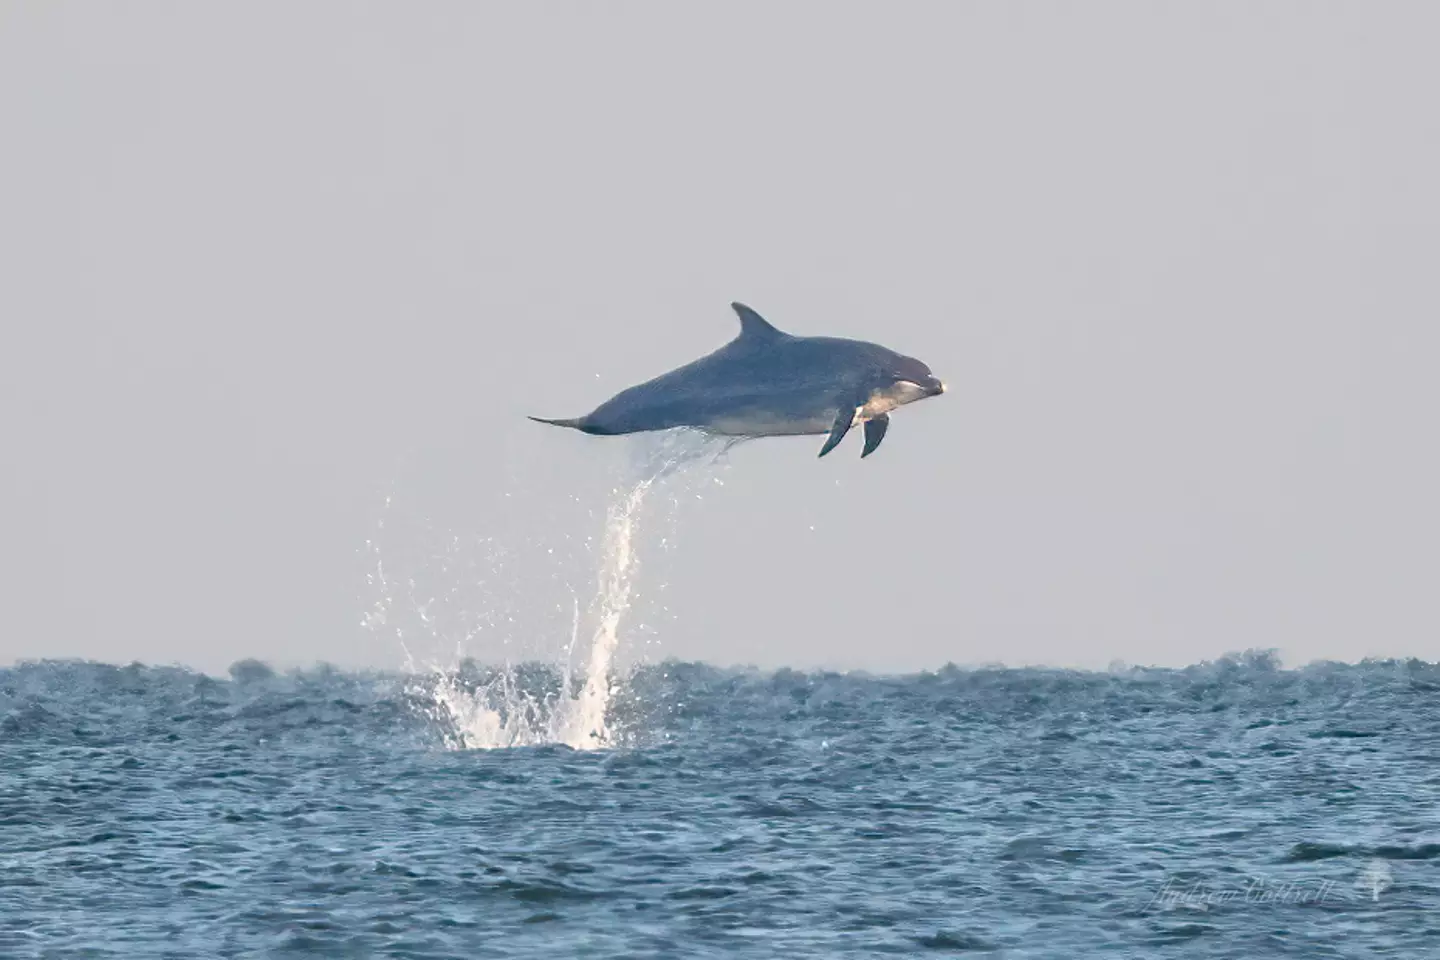 It's true, dolphins really do leap out of the water to great heights.